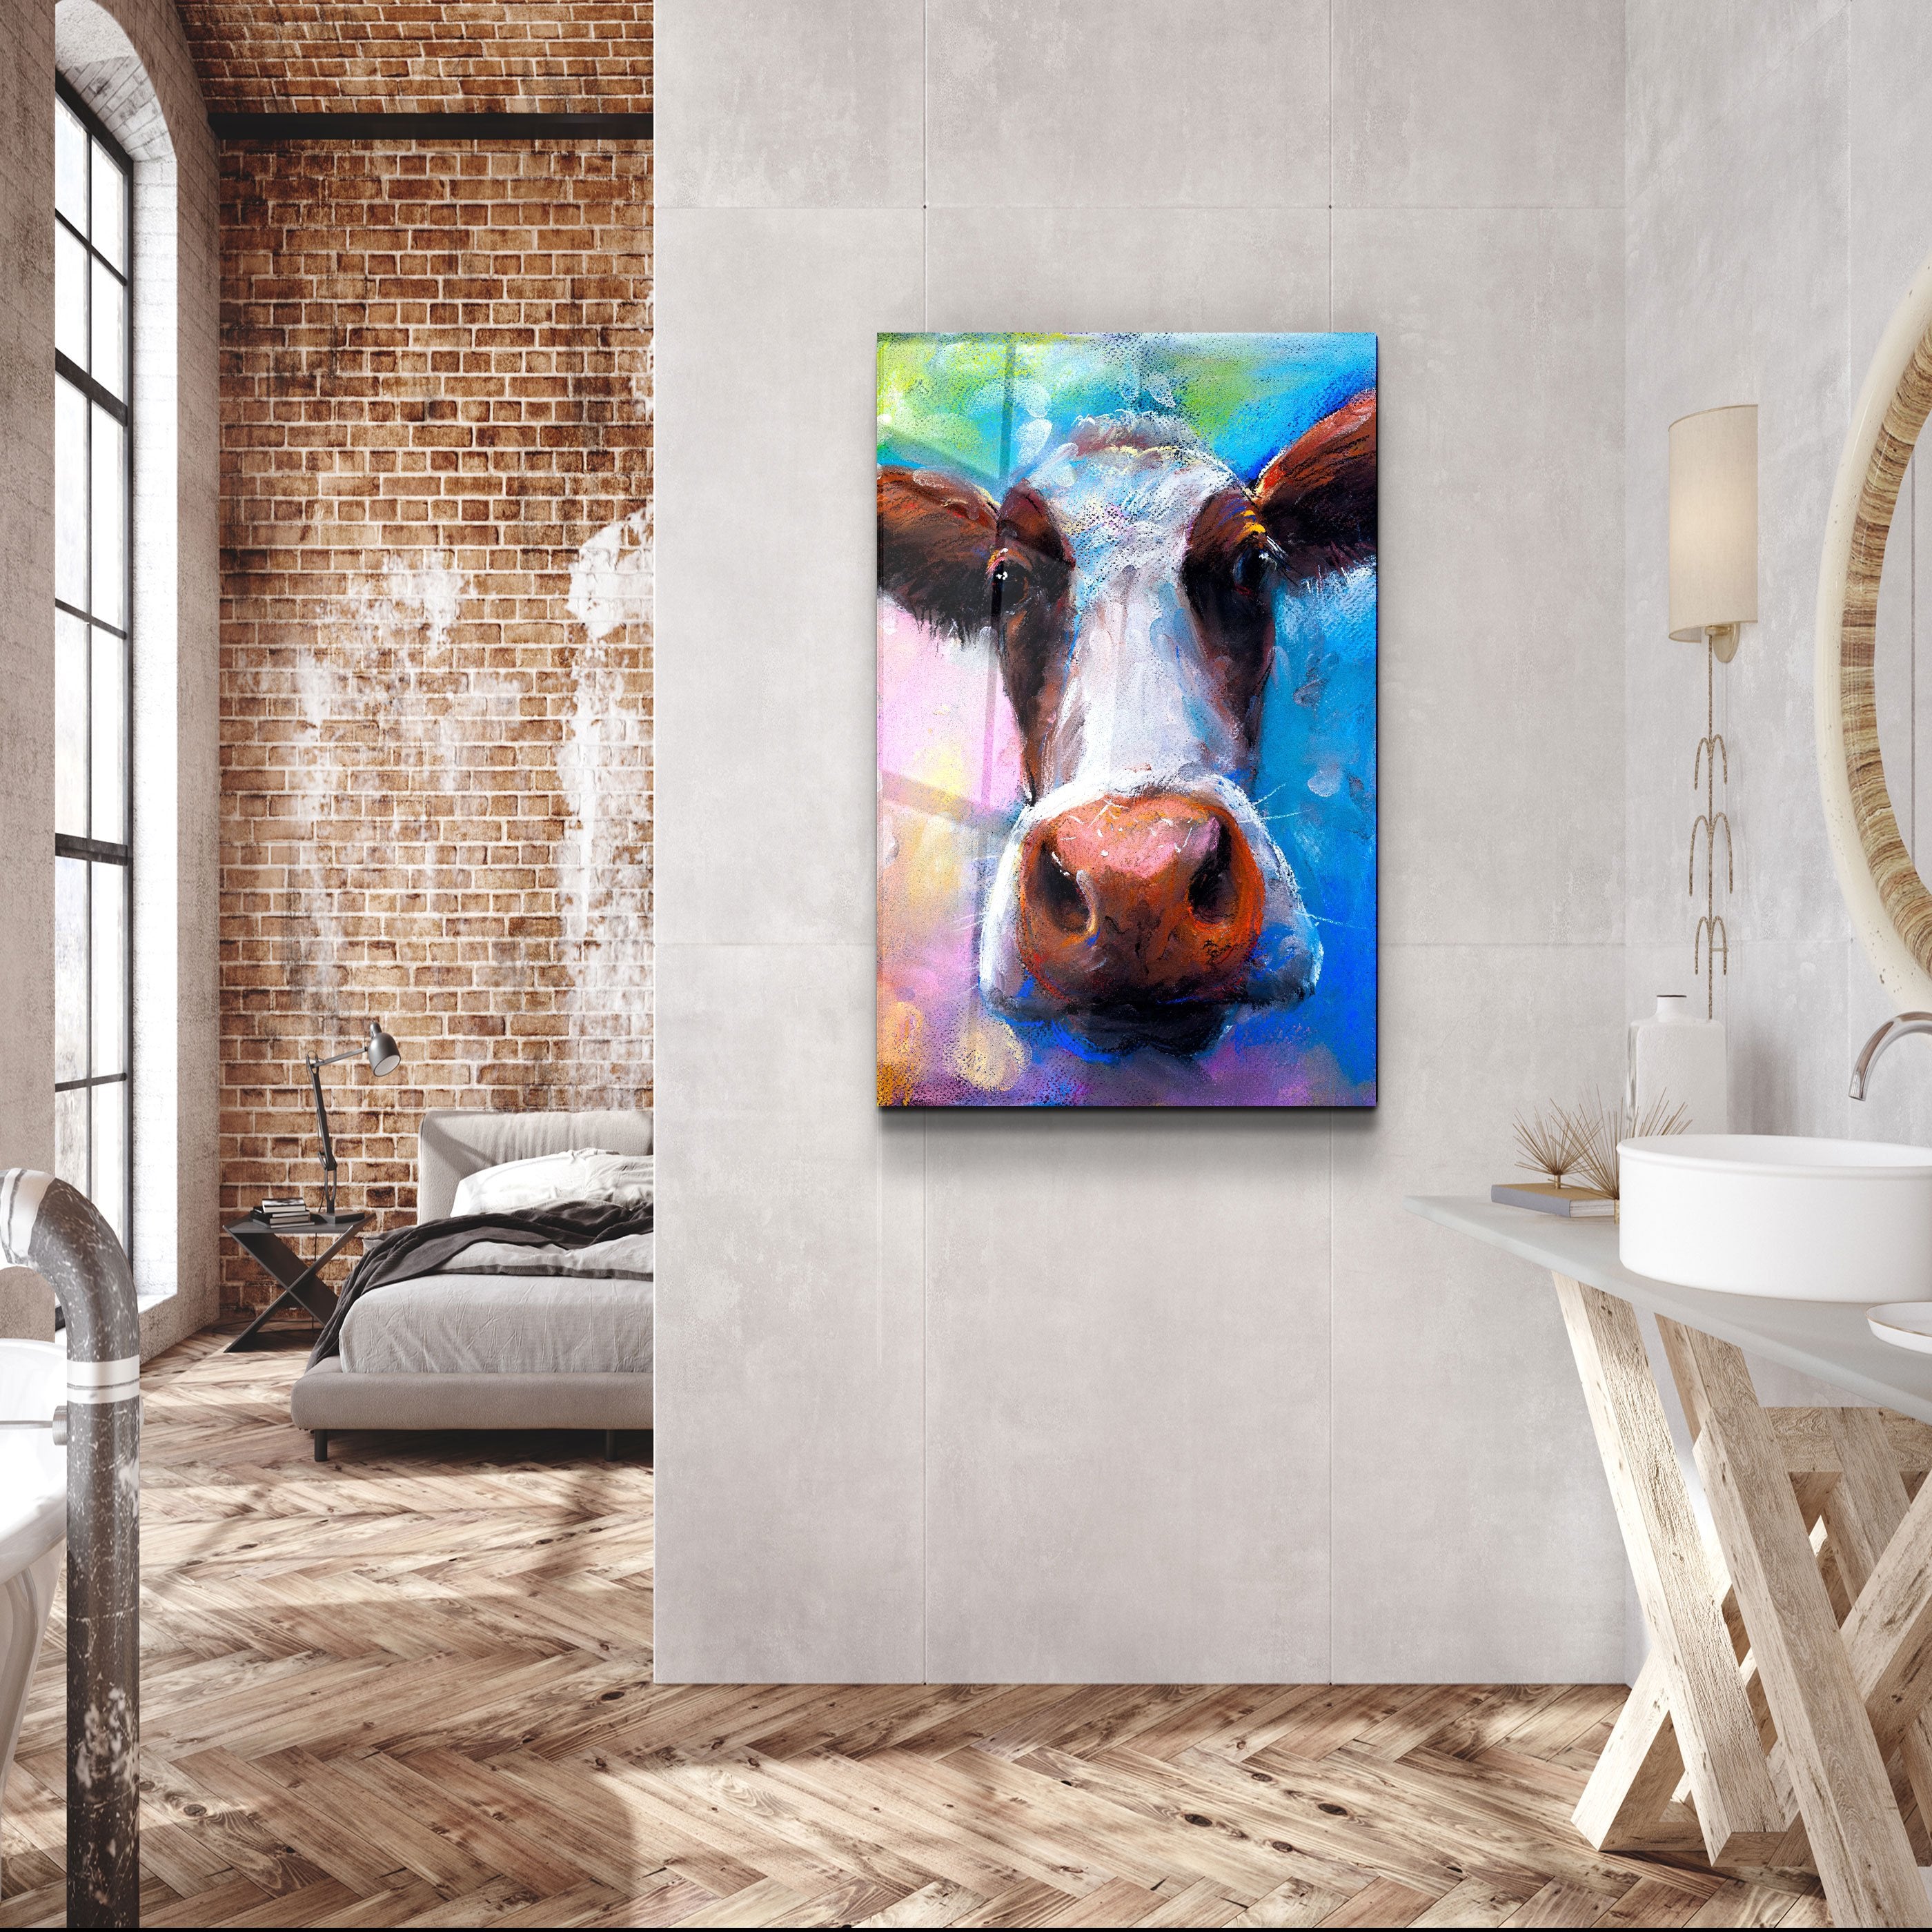 ・"Cow Smiling"・Glass Wall Art